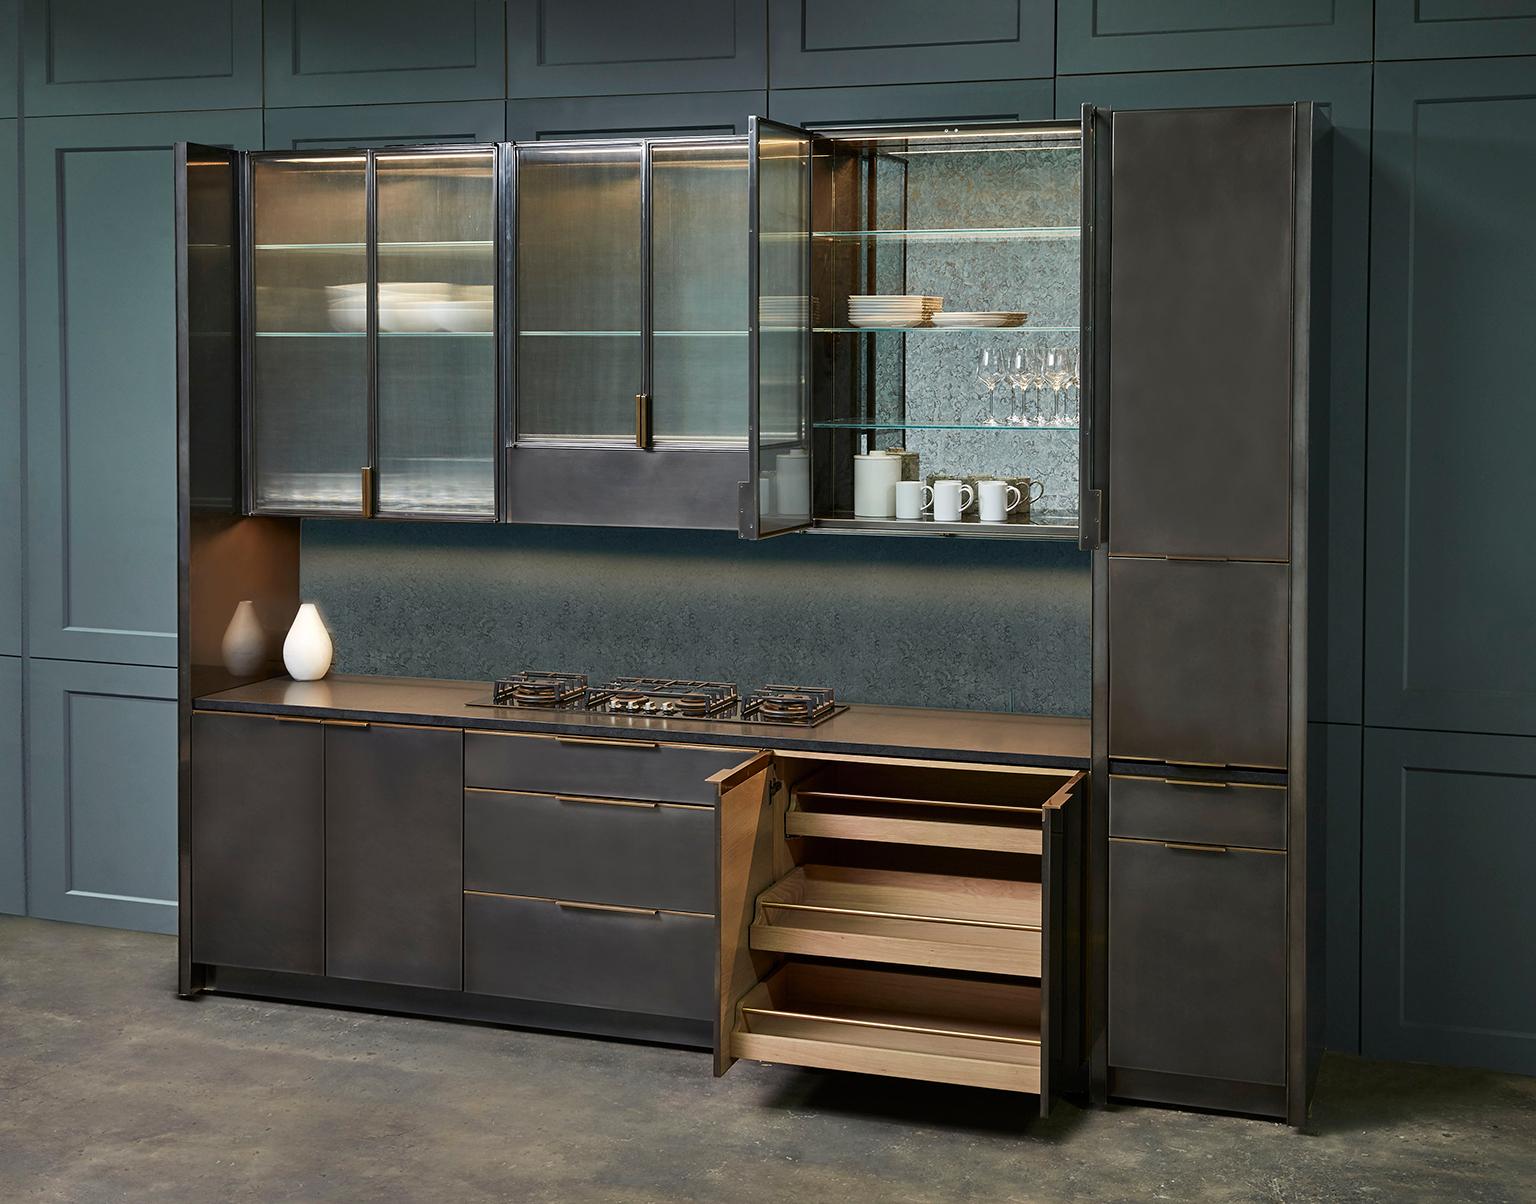 Amuneal’s gunmetal kitchen is a fully bespoke kitchen system that blends individual functionality with Minimalist detailing. The interior cabinetry is fabricated from solid wood and handcut veneers offering the highest quality traditional